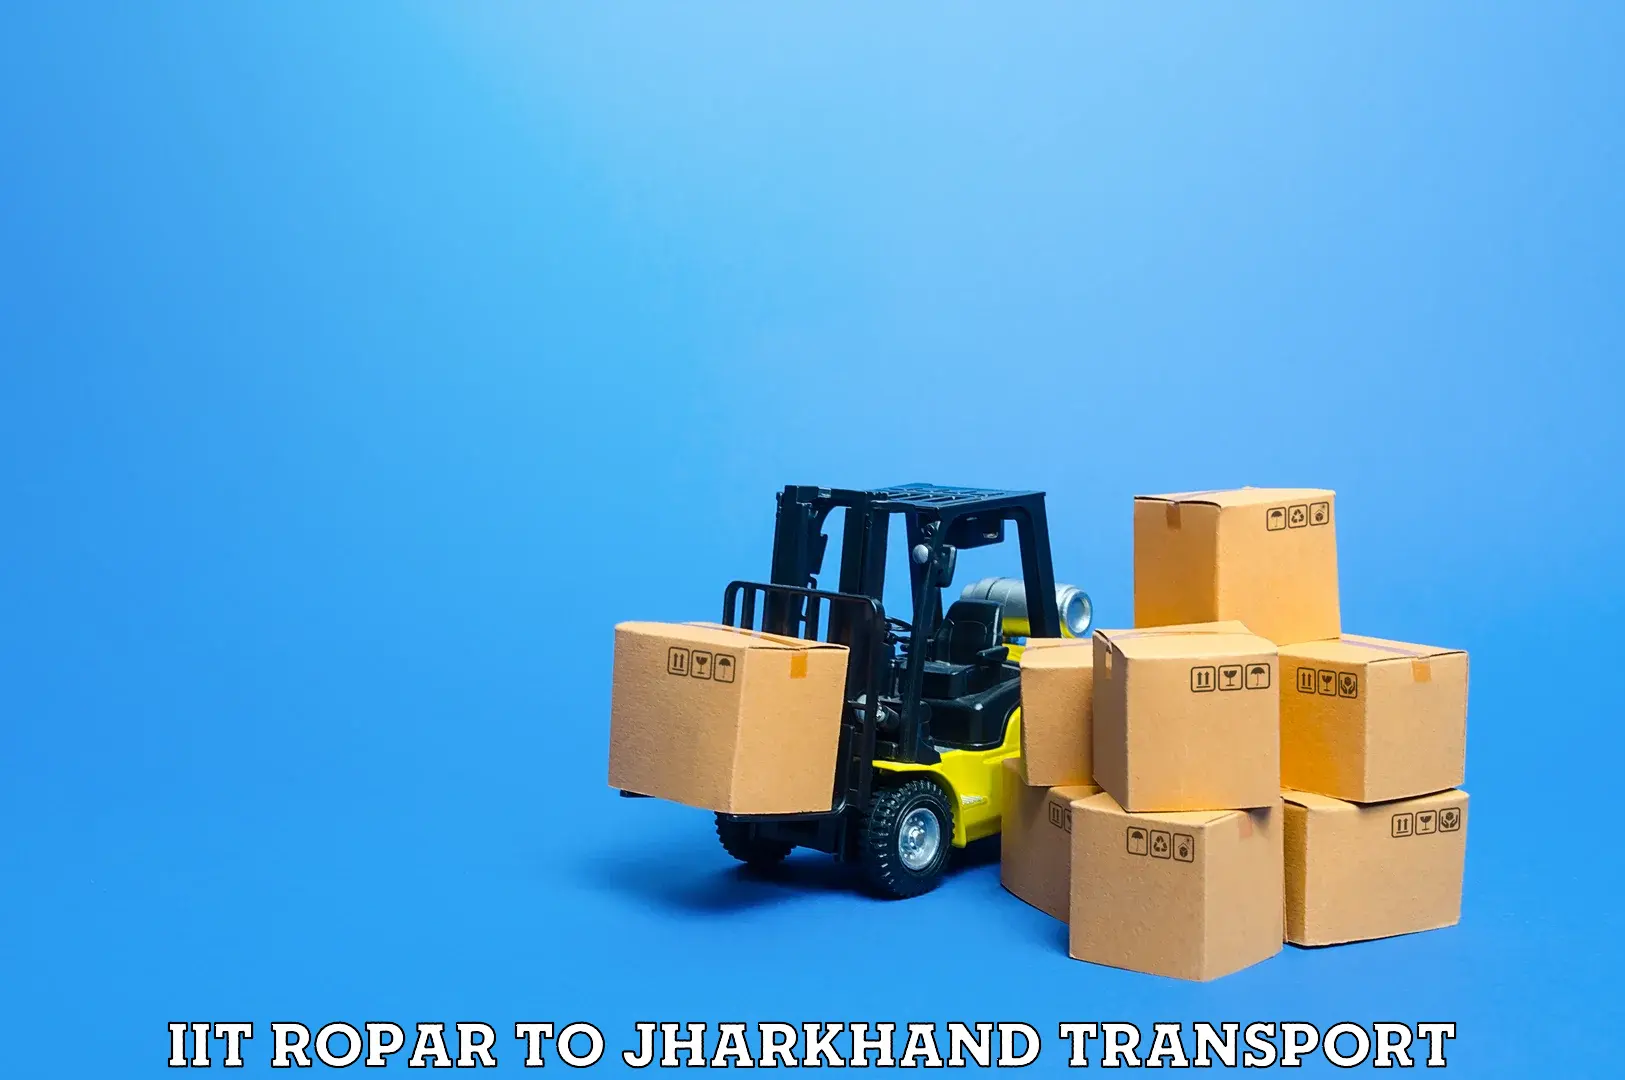 Commercial transport service IIT Ropar to Peterbar